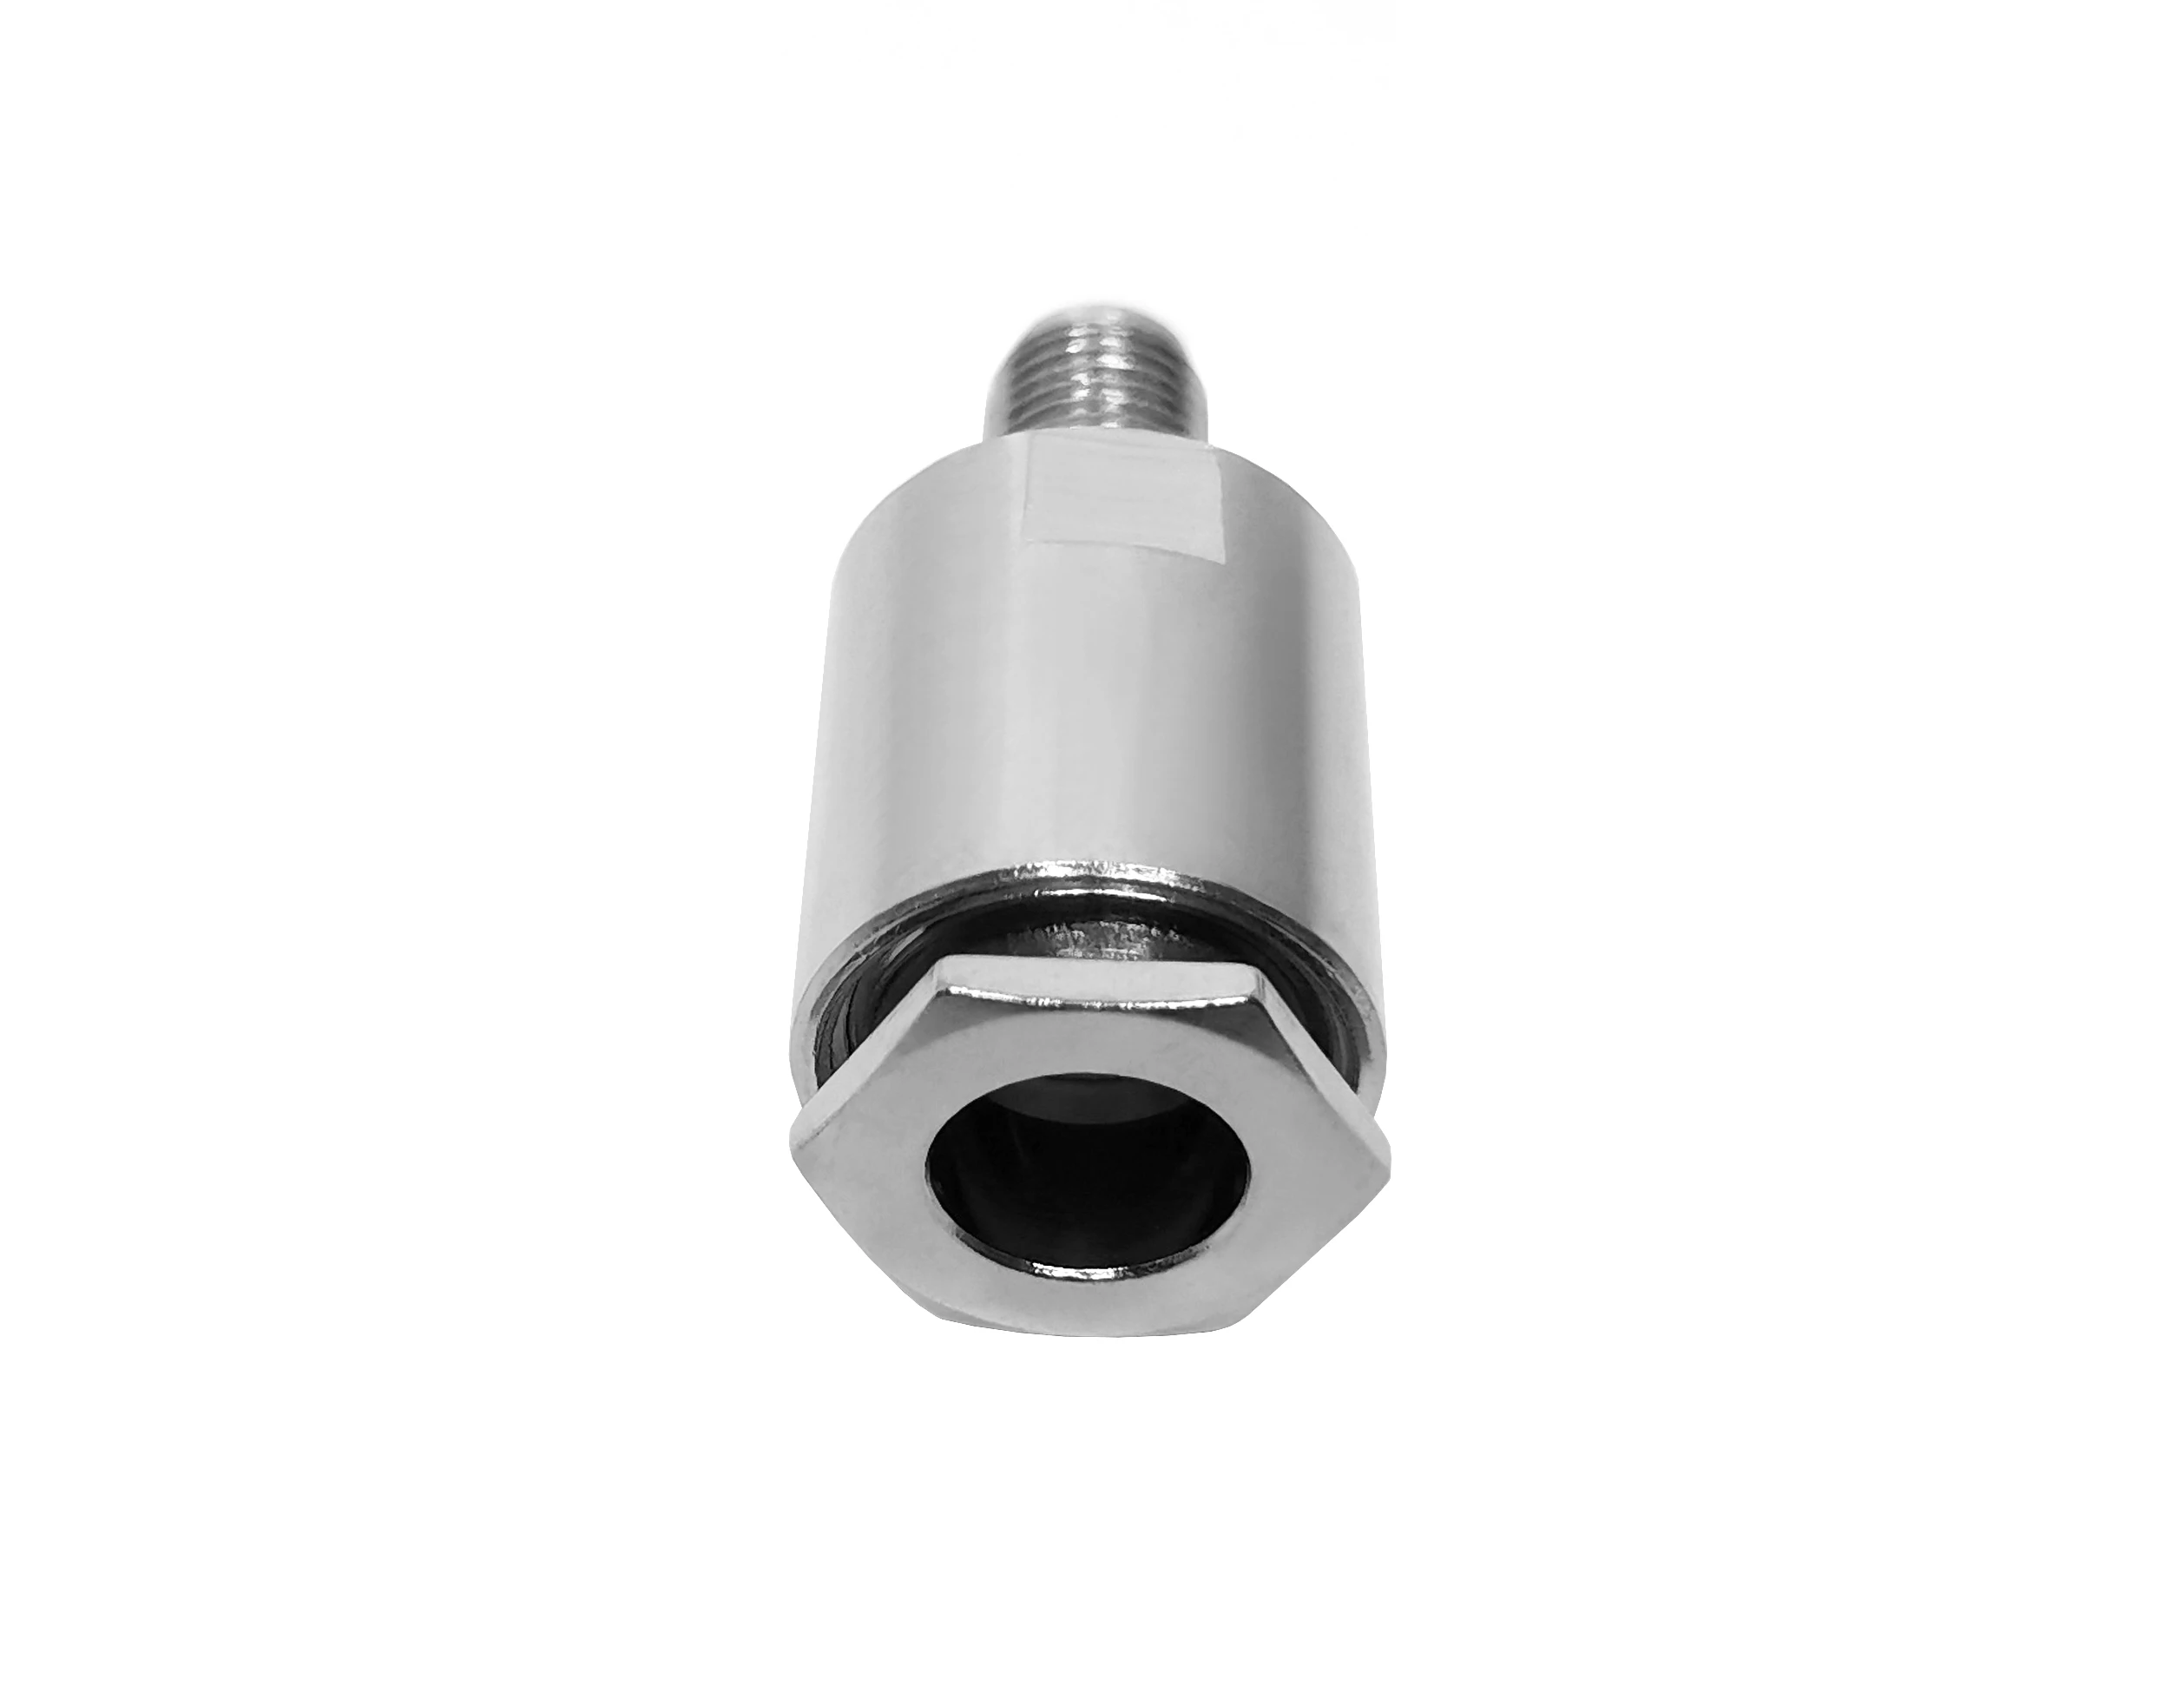 RF connector SMA female jack clamp mount screw lmr240 H155 cable  rf coaxial connectors details